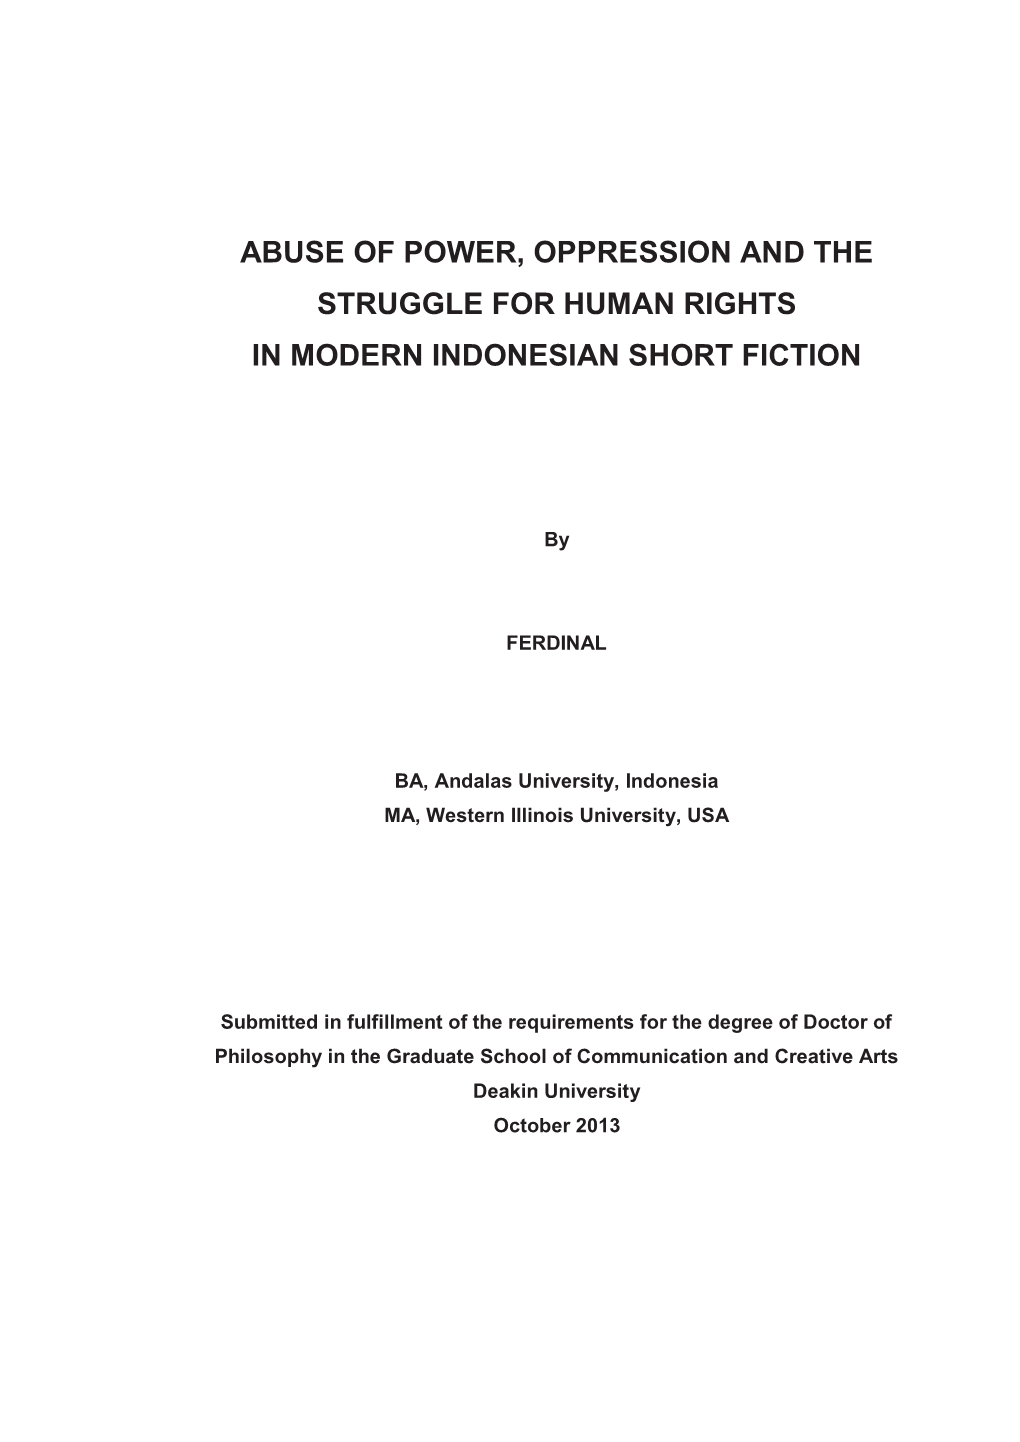 Abuse of Power, Oppression and the Struggle for Human Rights in Modern Indonesian Short Fiction